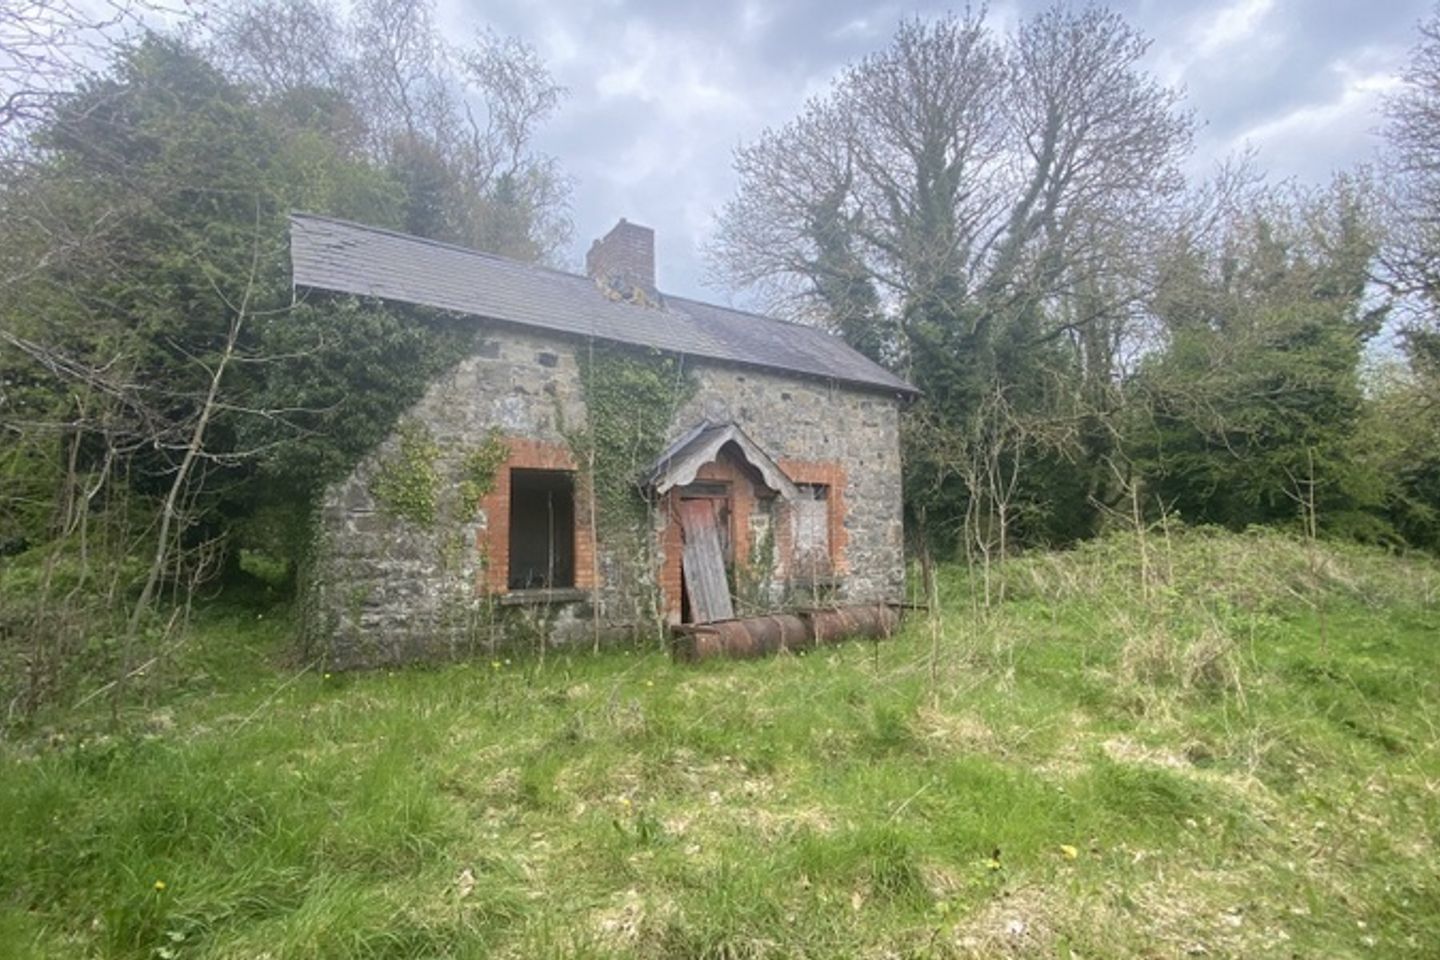 Williamstown, Coole, Co. Westmeath is for sale on Daft.ie